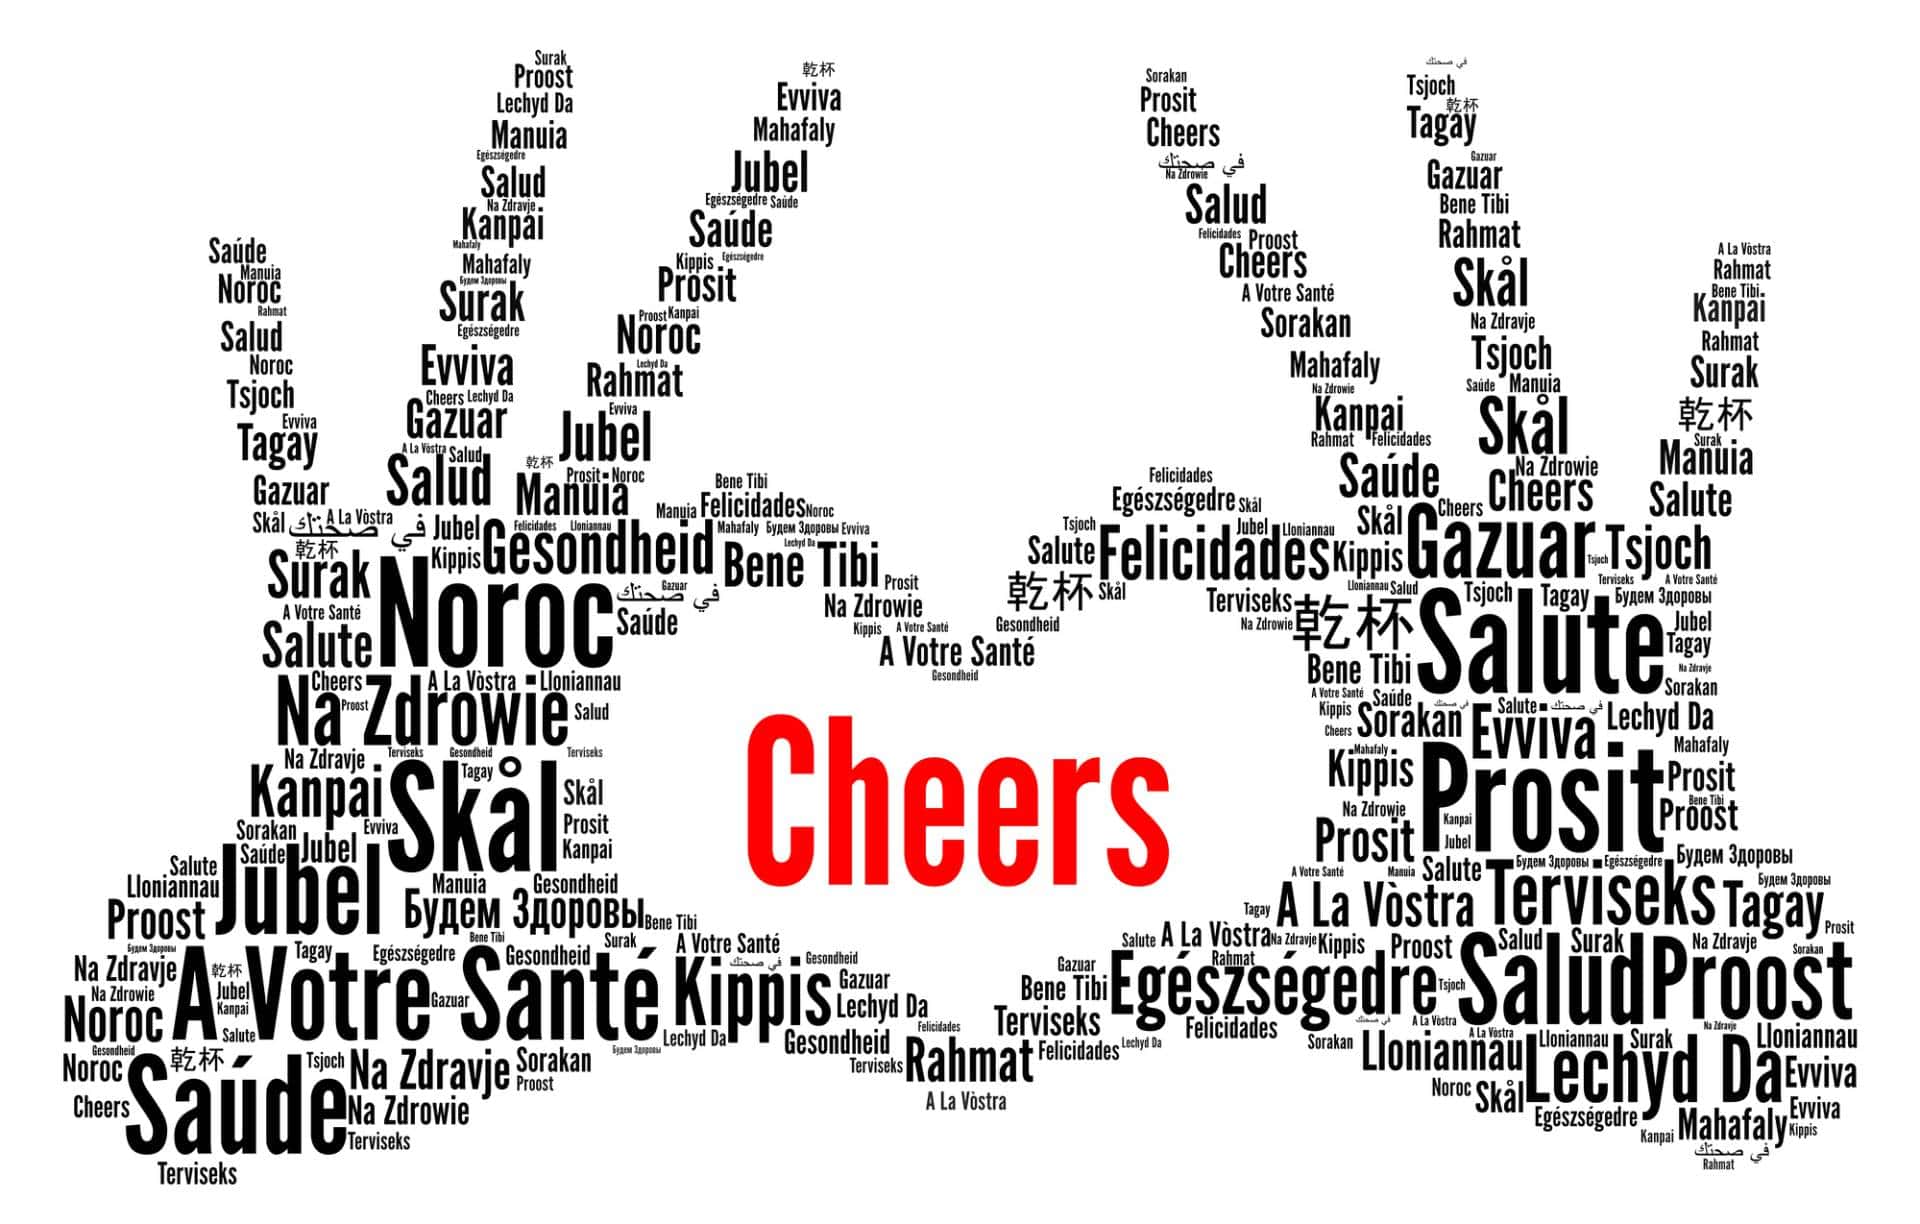 How do I say cheers in different languages?